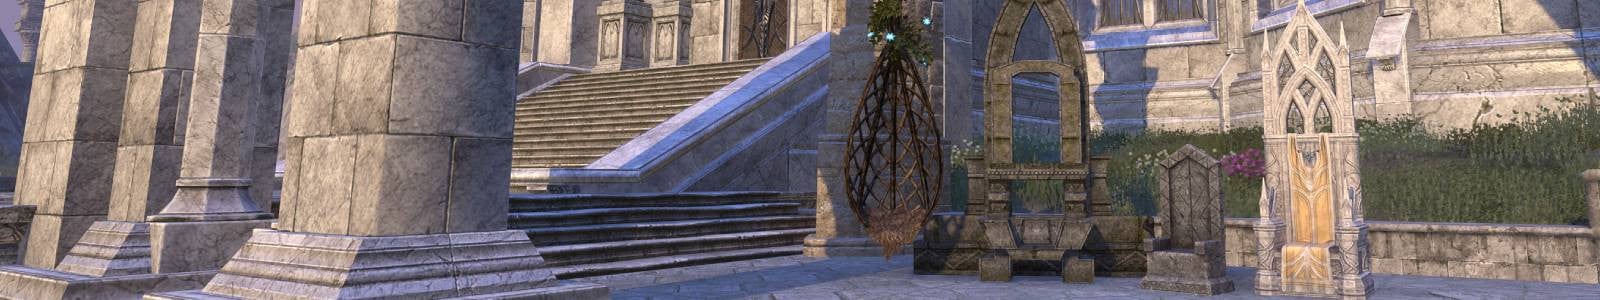 Seat of the Snow Prince - ESO header